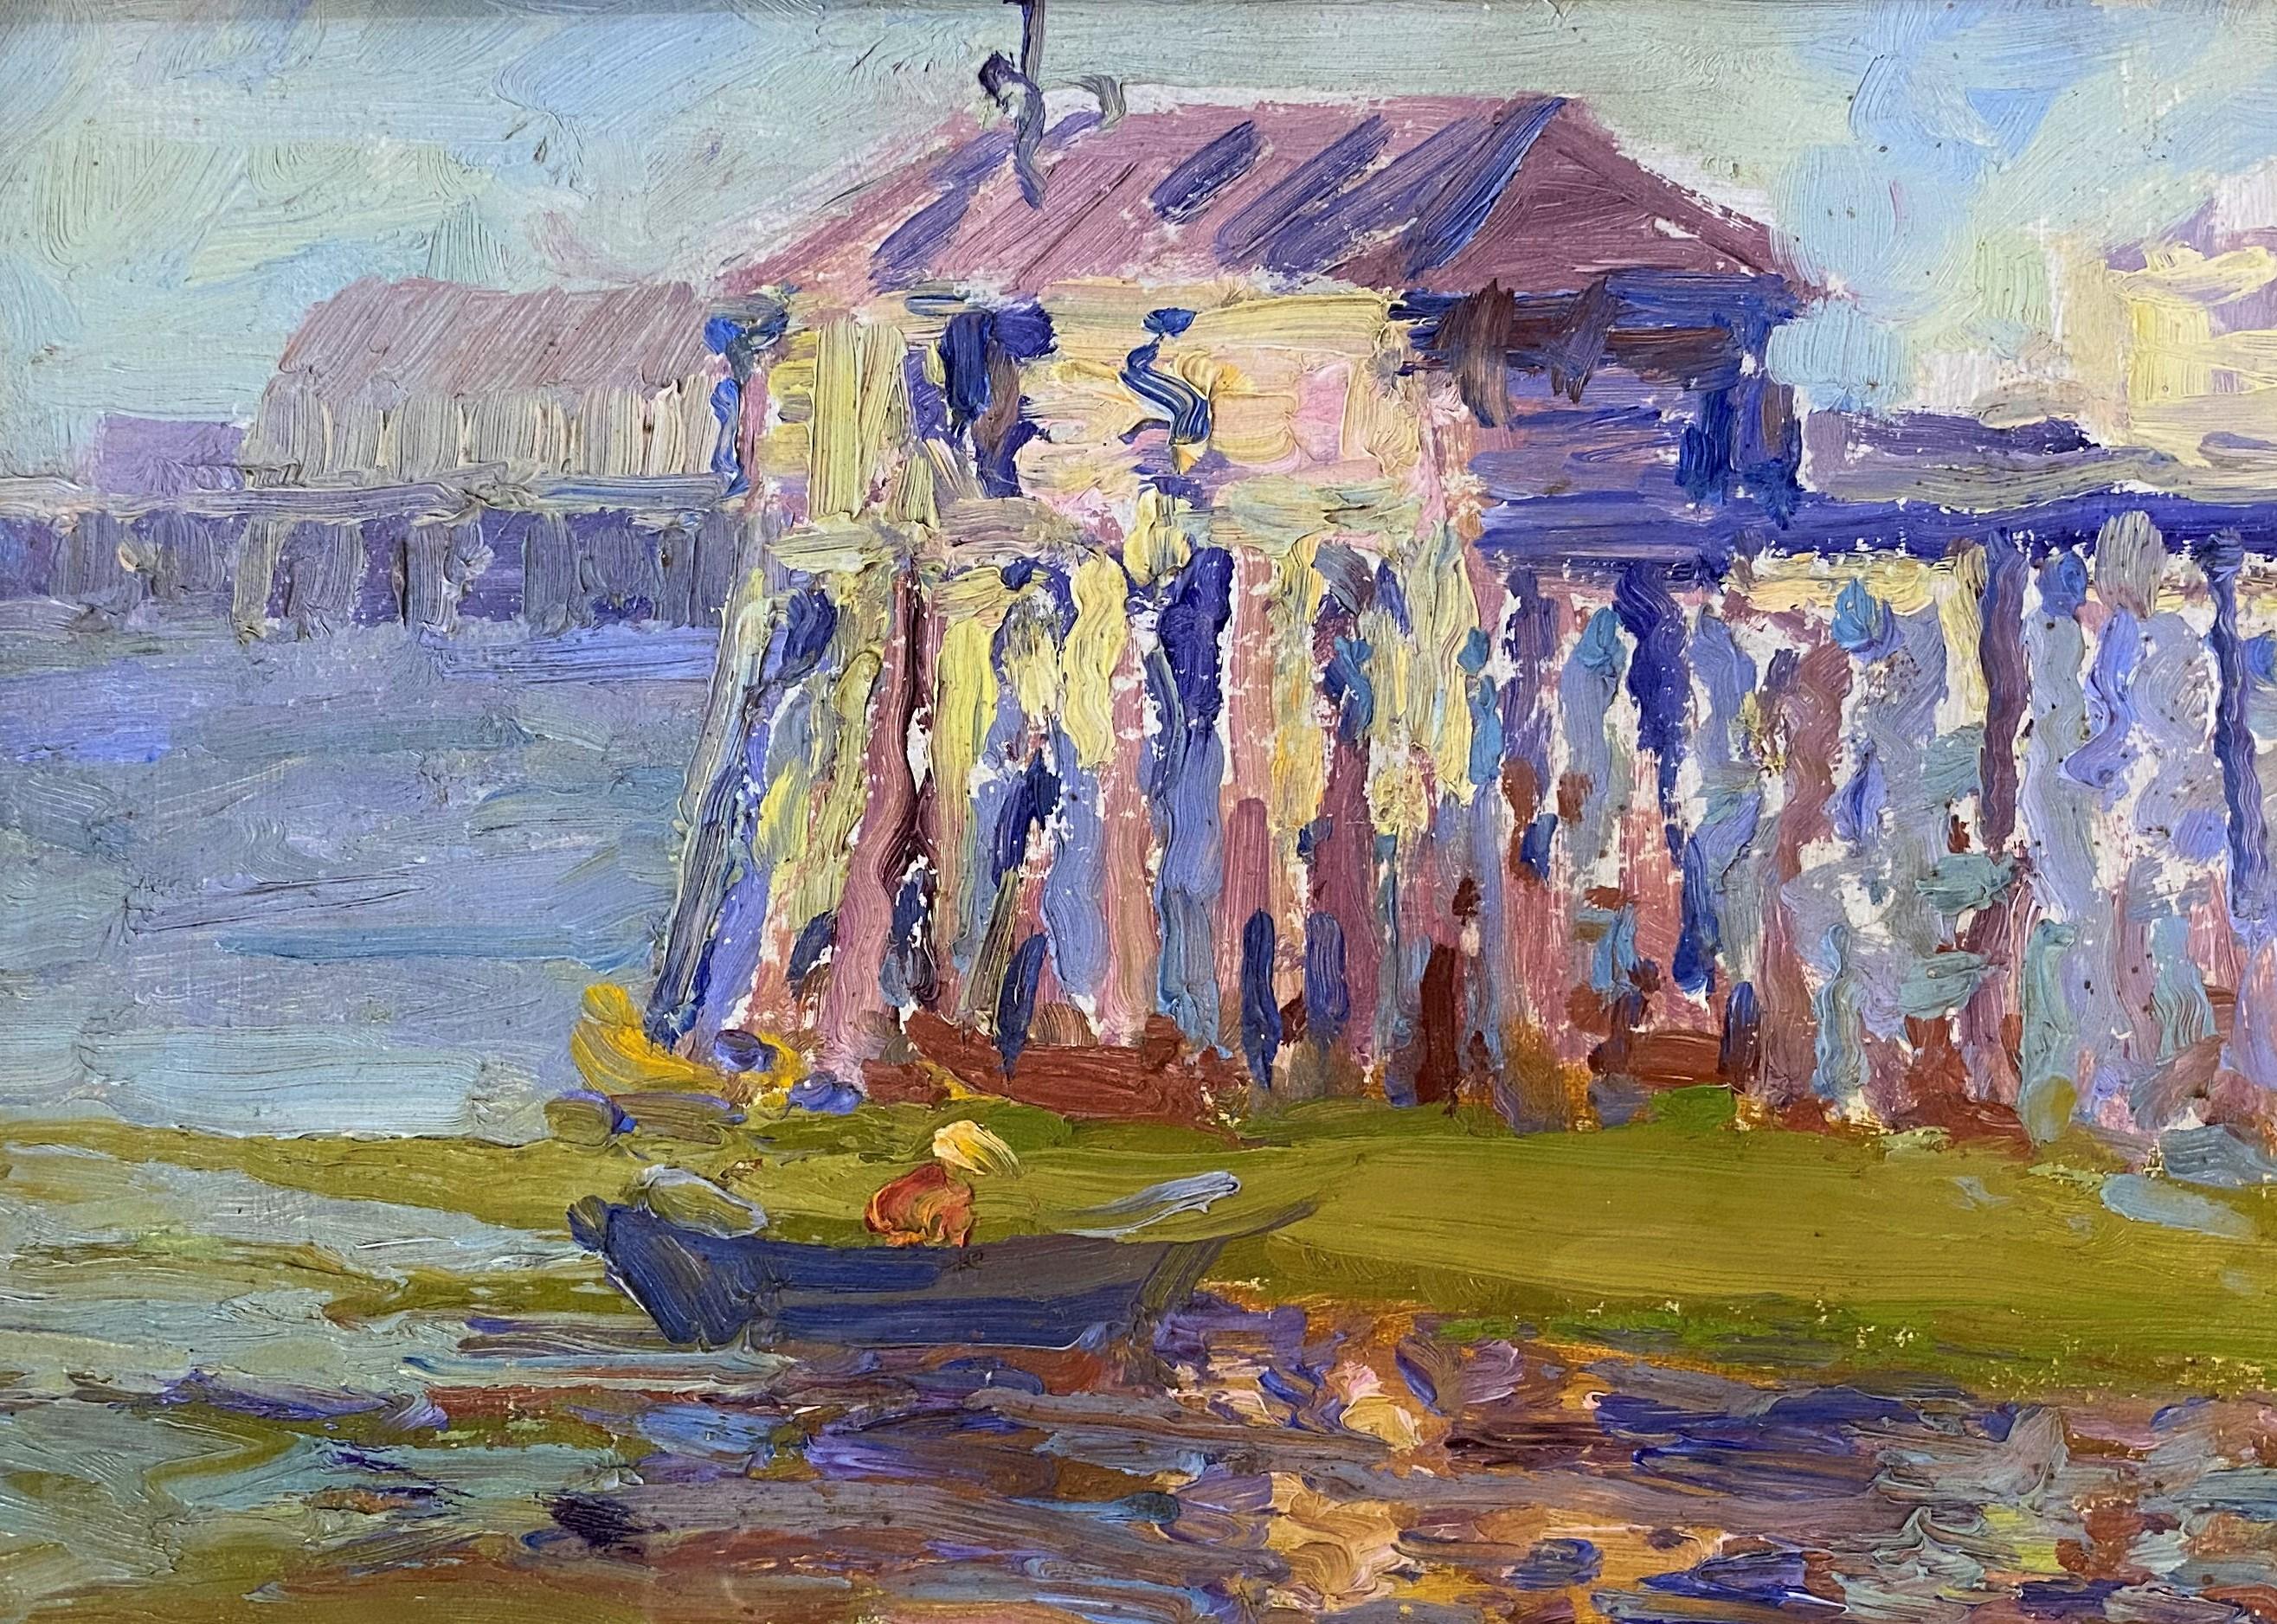 A fine impressionist coastal oil painting of Provincetown, MA by American impressionist artist Henry Rya MacGinnis (1874-1962). MacGinnis was born in Indiana and began his art studies under the Hoosier artists T.C. Steele, J.O. Adams and William